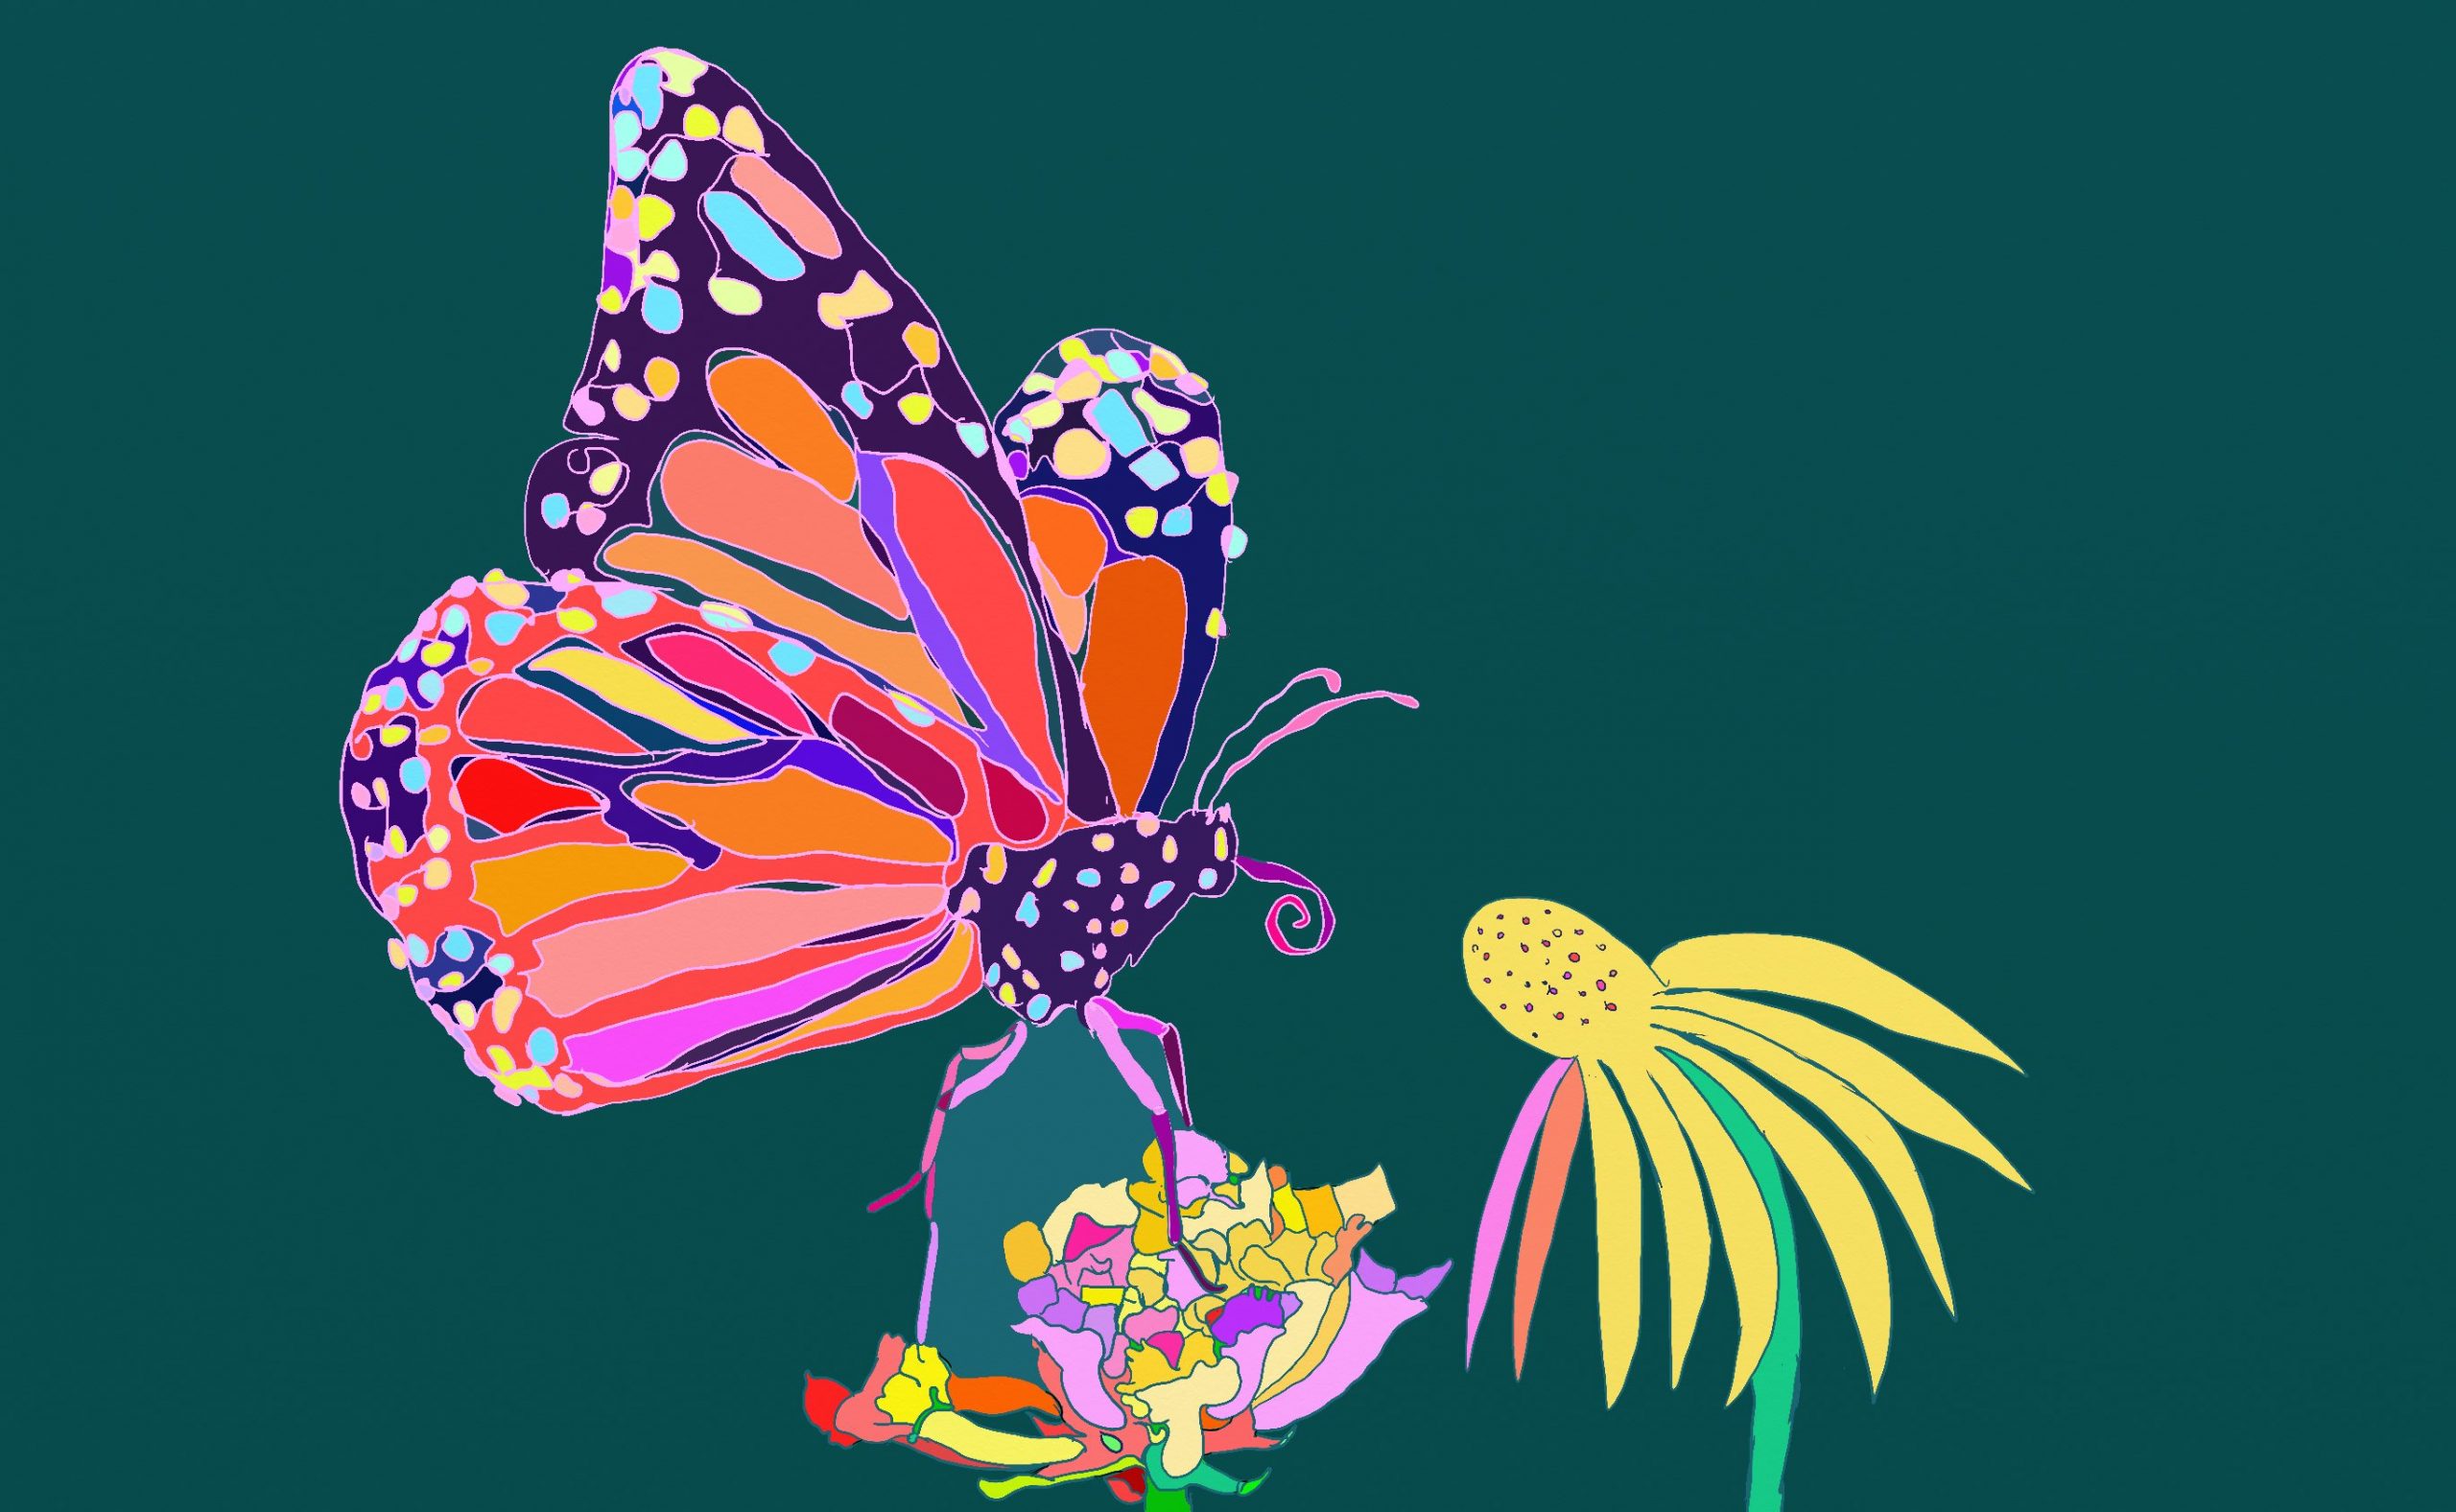 An artwork of a butterfly by Sonny Bean